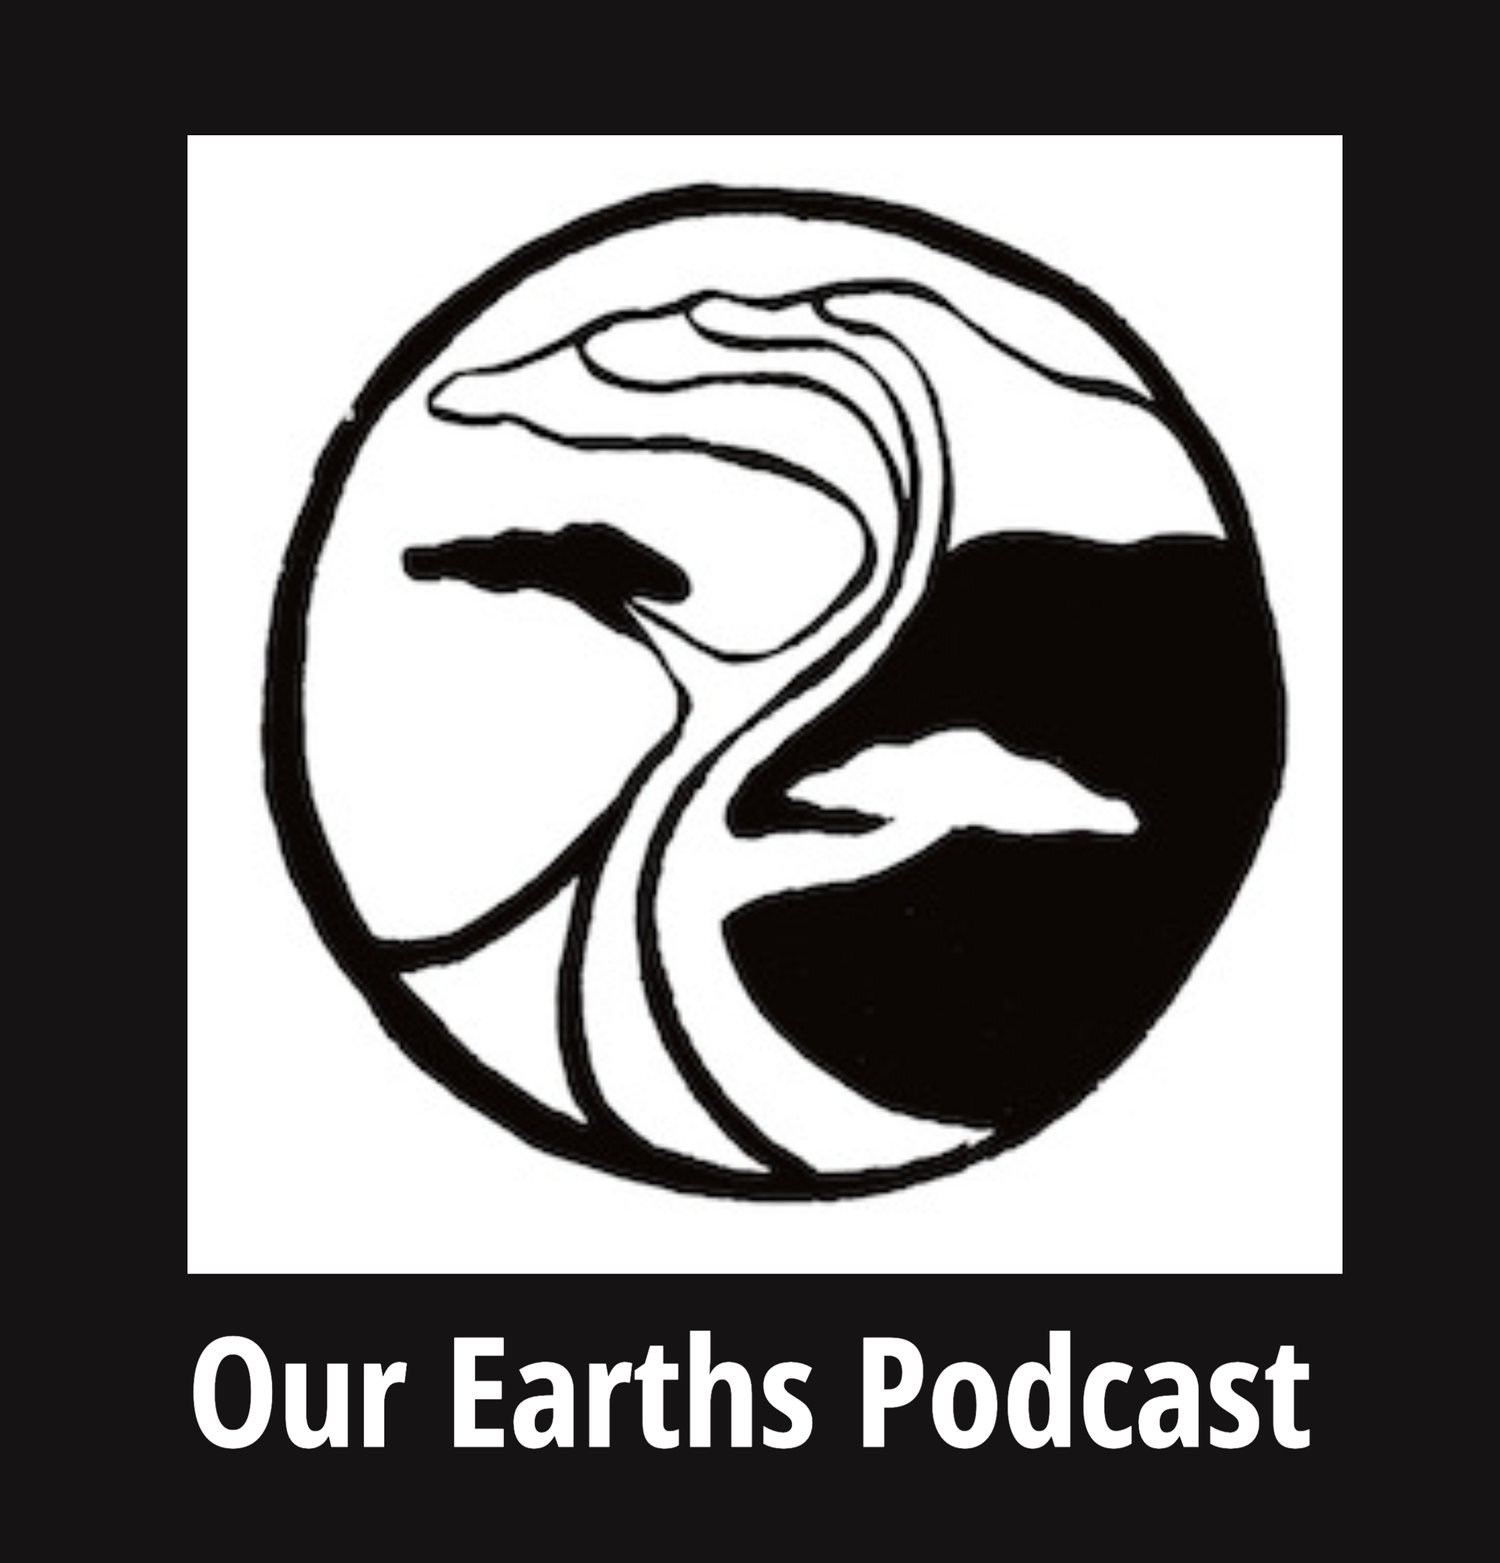 Our Earths Podcast